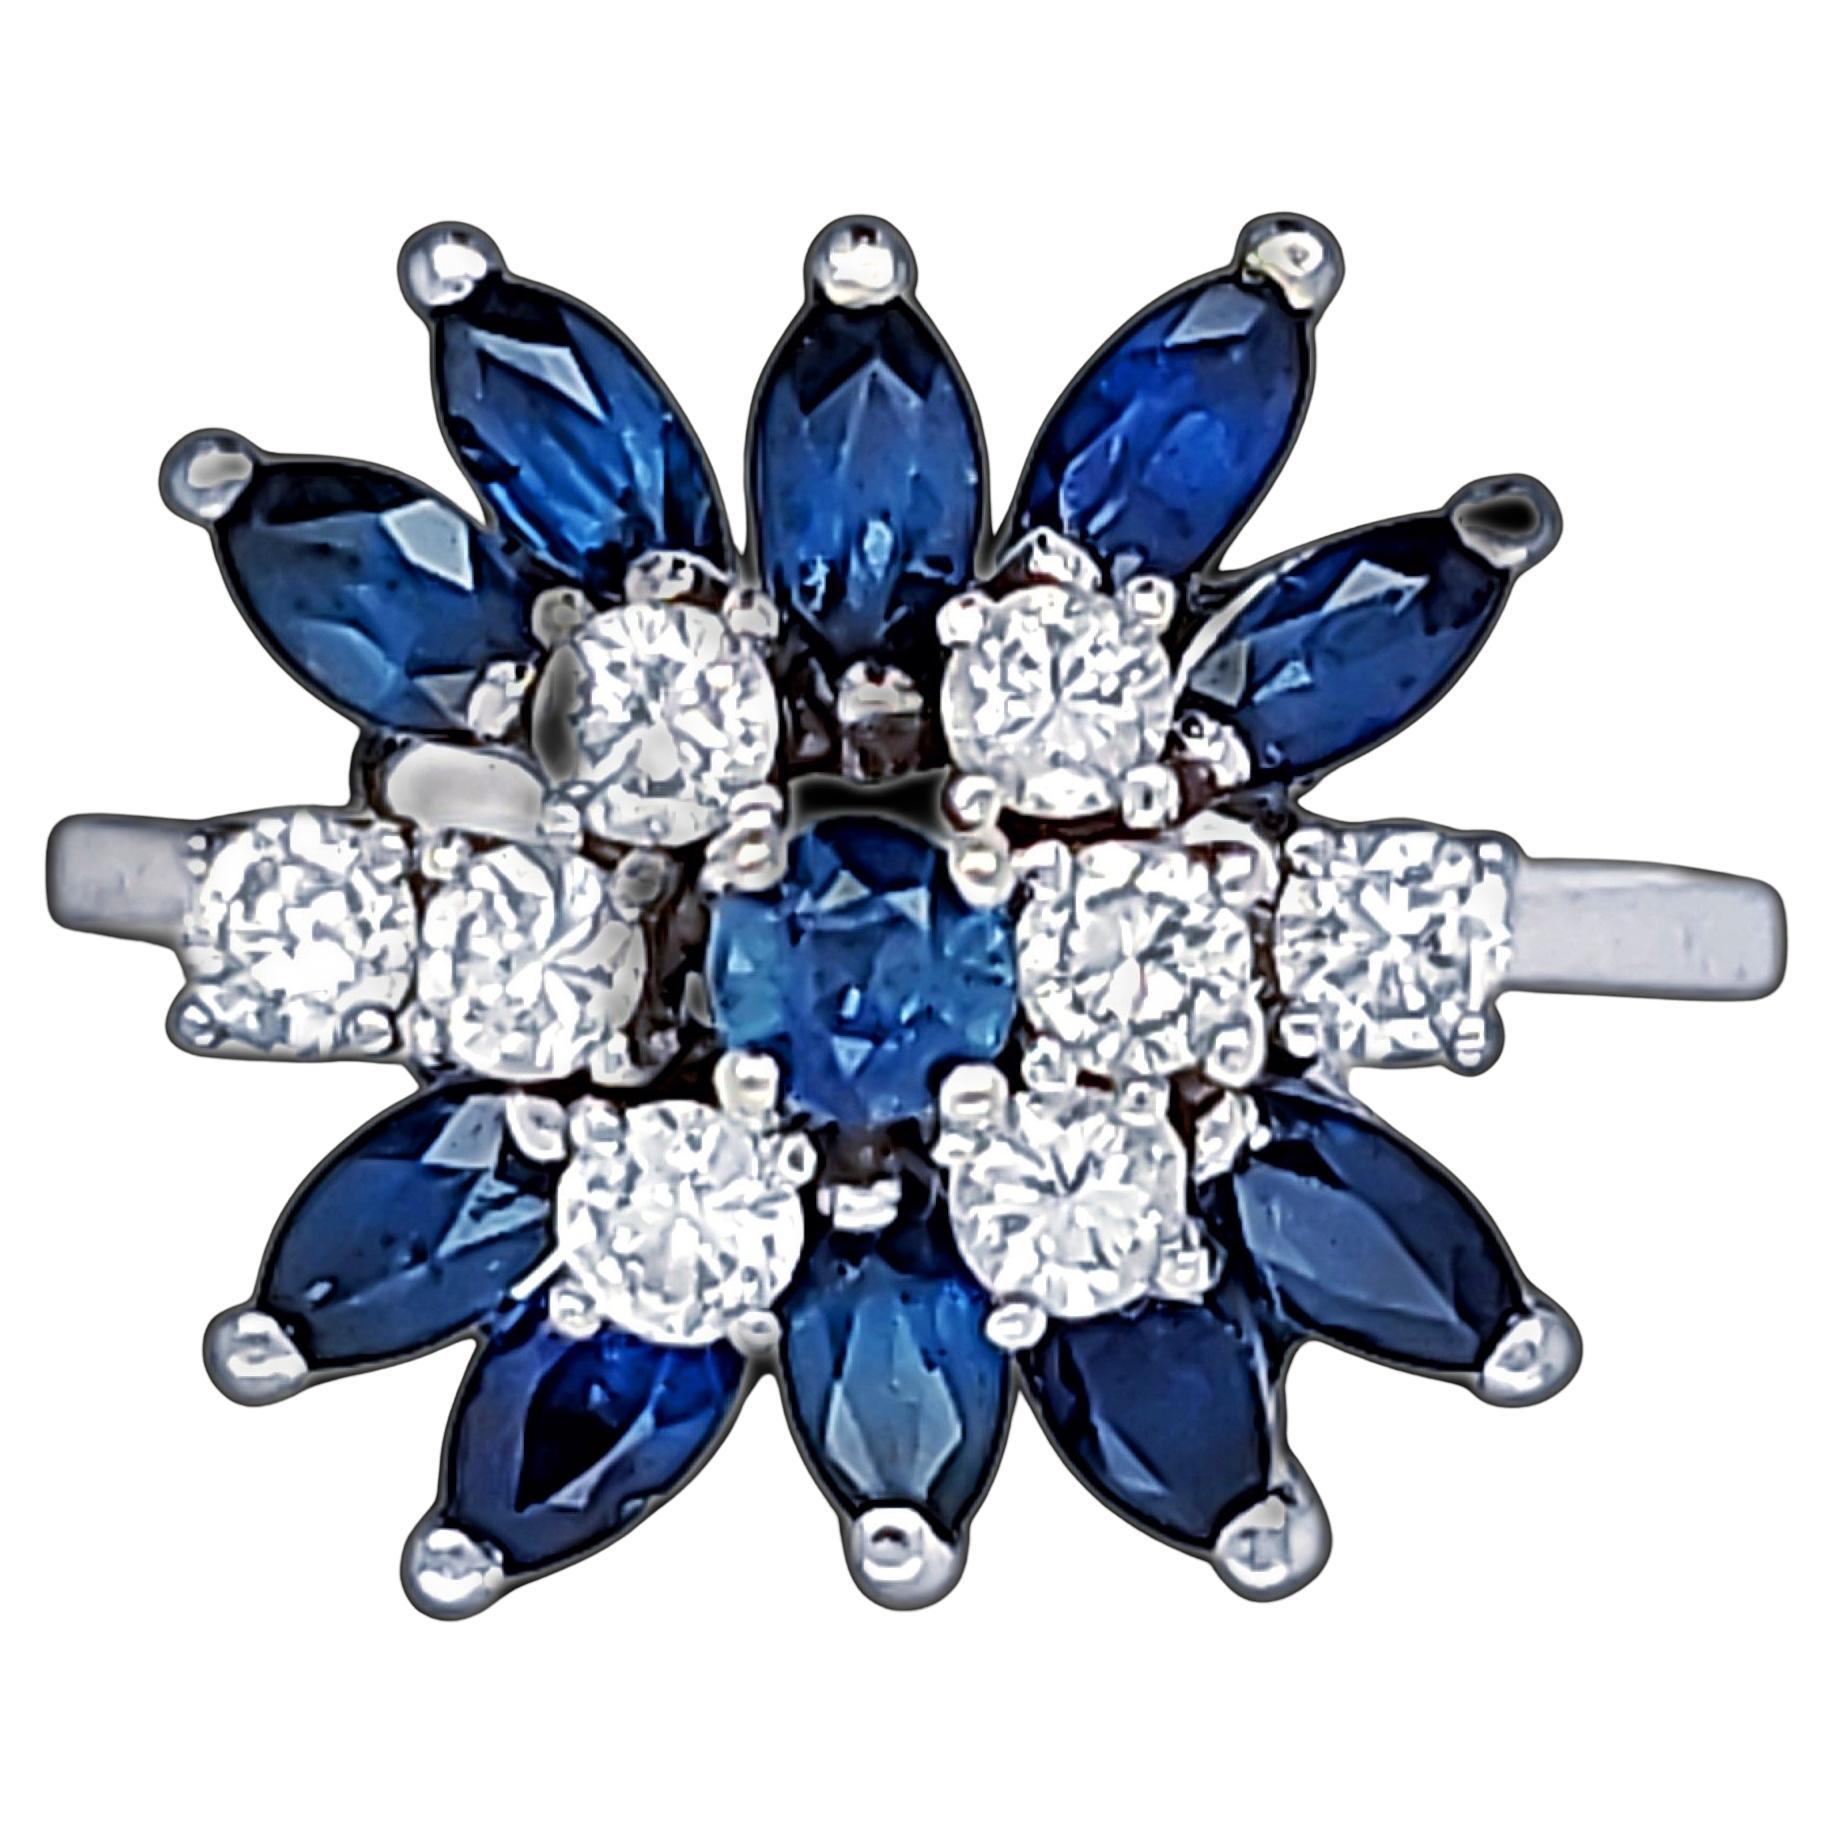 Sapphire/Diamond 14kt White Gold Ring - Cocktail Style - Family Estate Piece For Sale